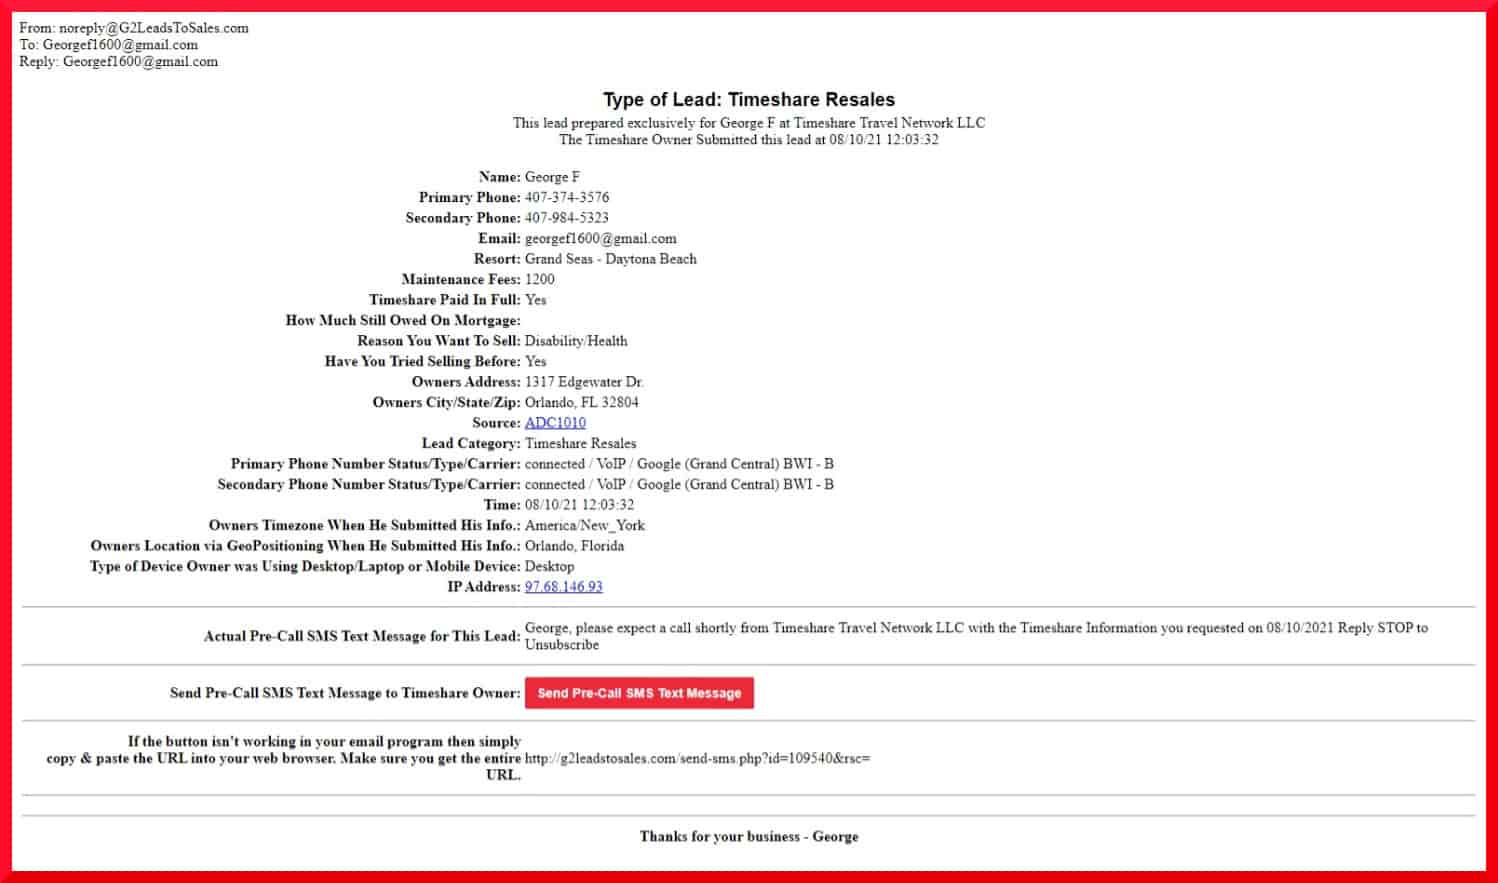 screenshot of real-time opt-in timeshare resales lead email